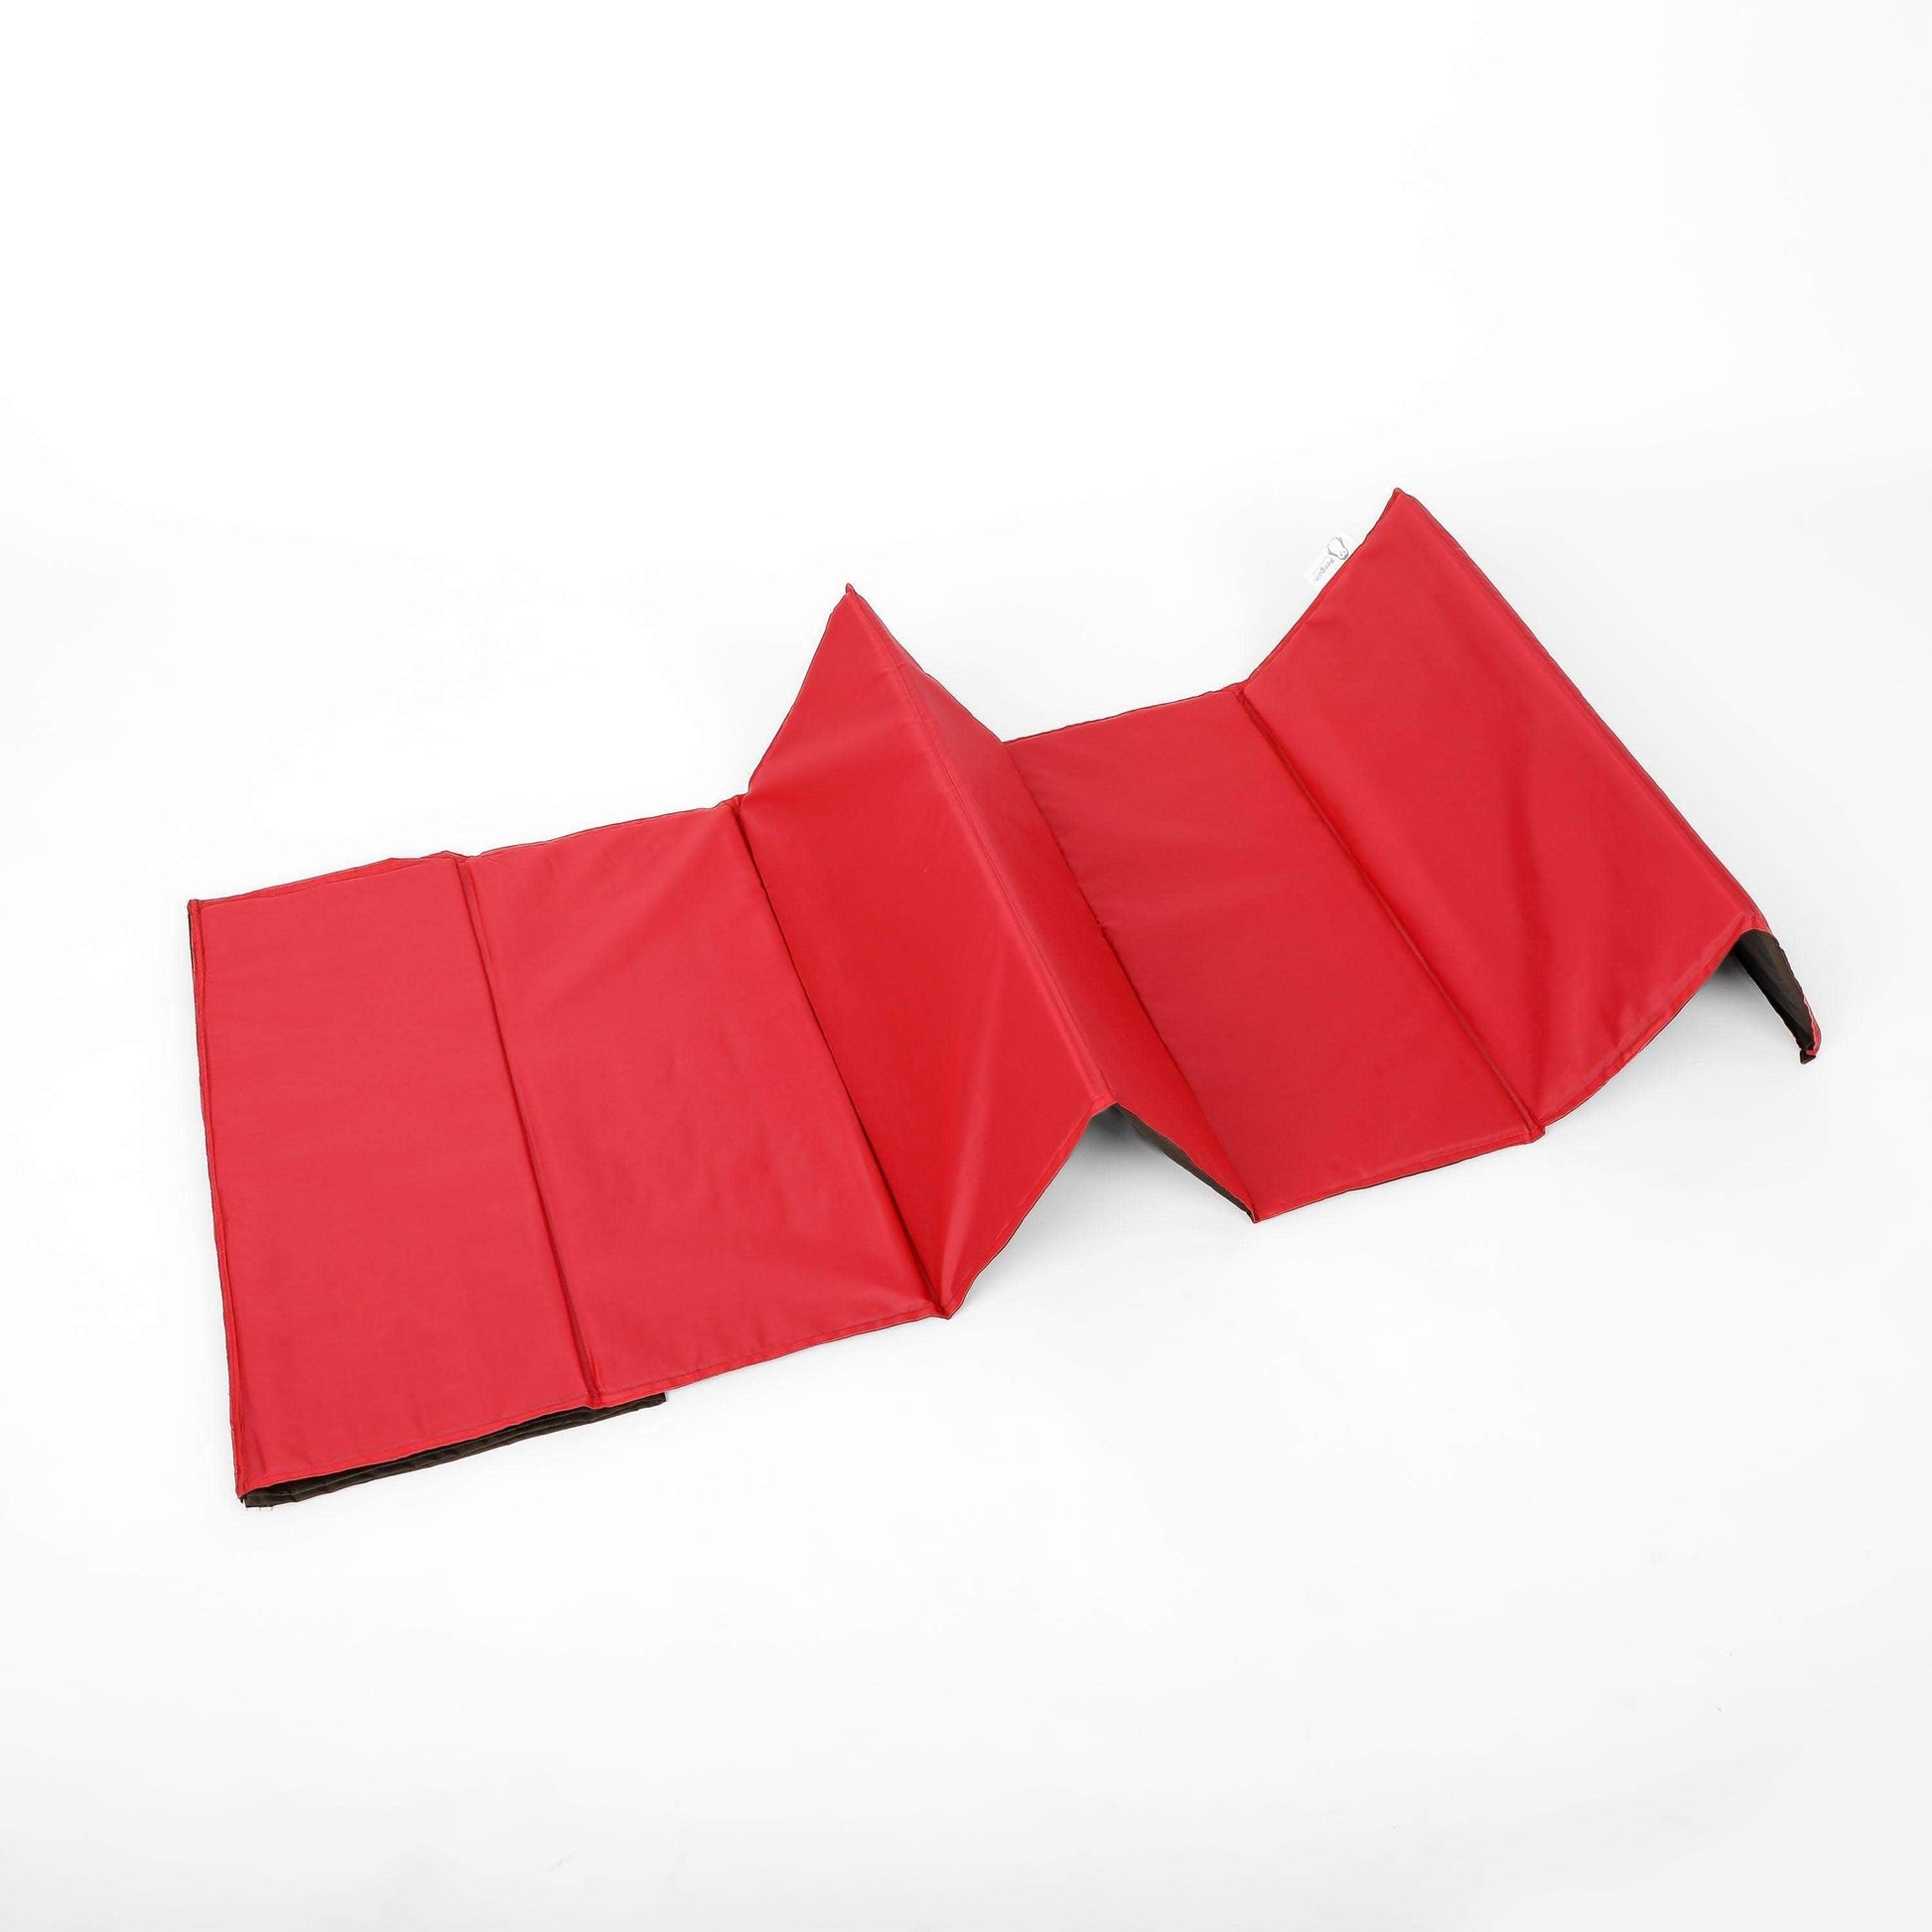 Penguin Camping Tools Sport Double folded Mat